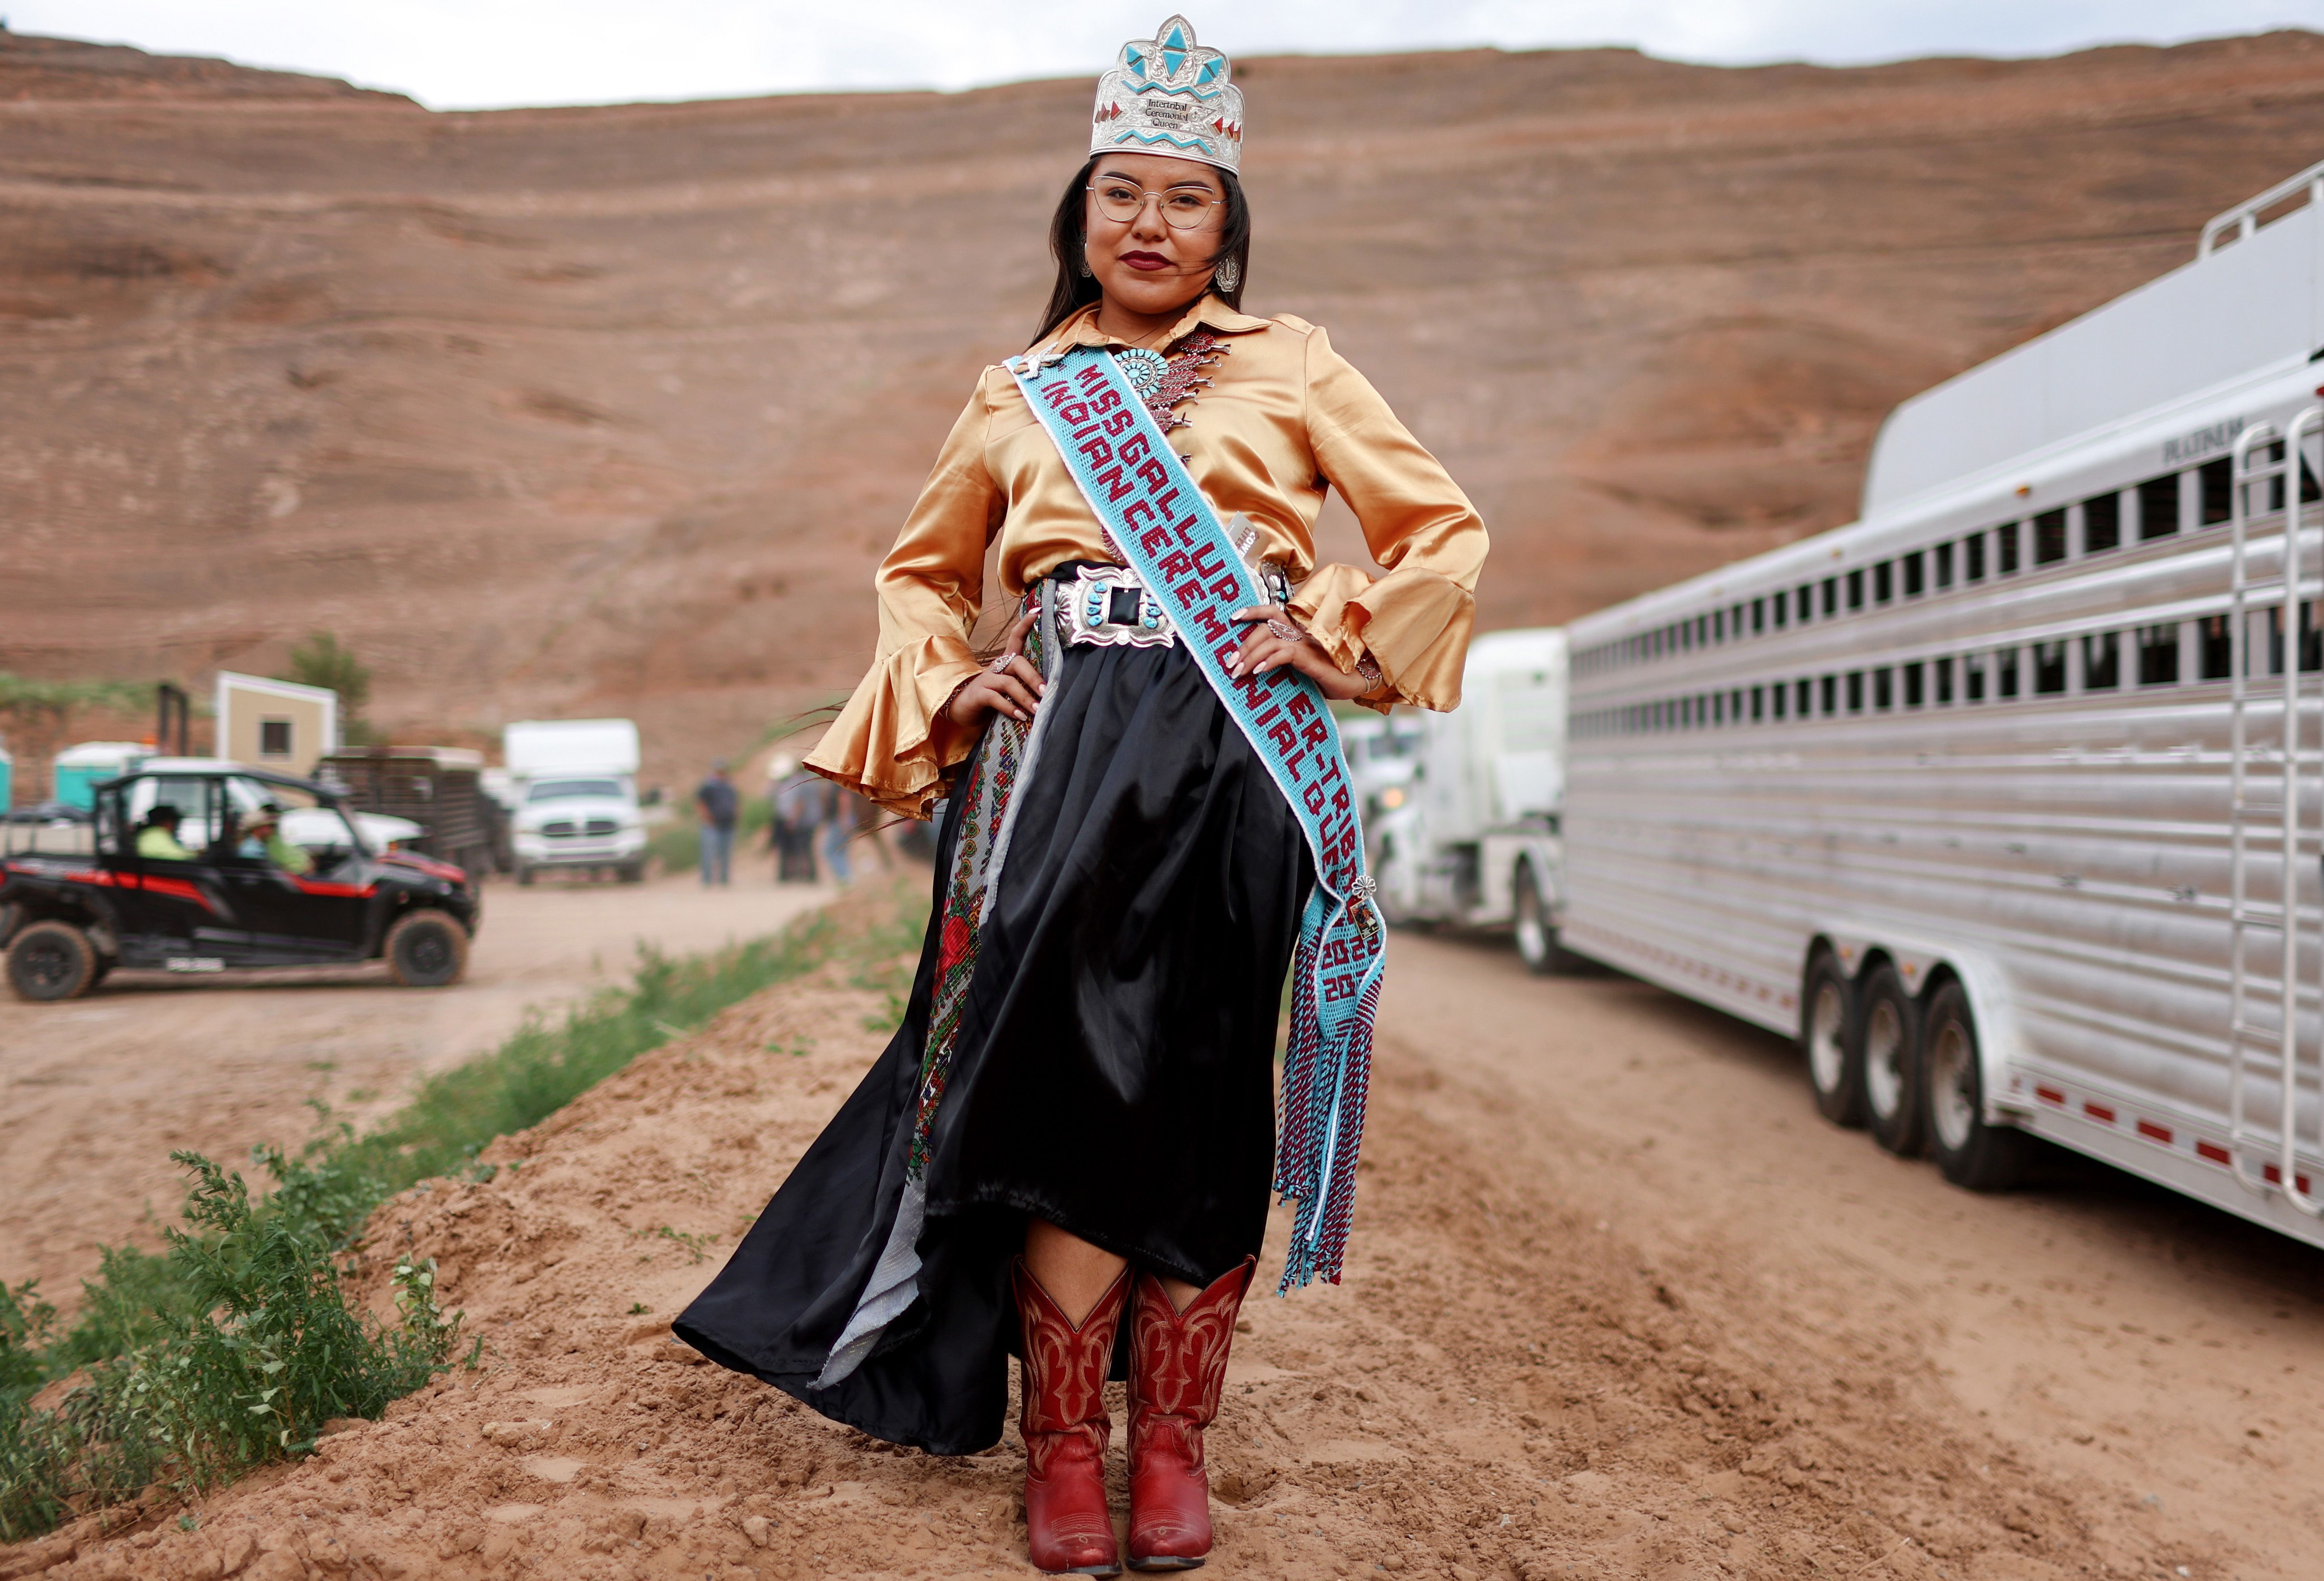 2022 Miss Gallup Inter-Tribal Indian Ceremonial Queen Cajun Cleveland, who is Diné (Navajo), stands for a photo after the ceremonial rodeo near Gallup, New Mexico. 